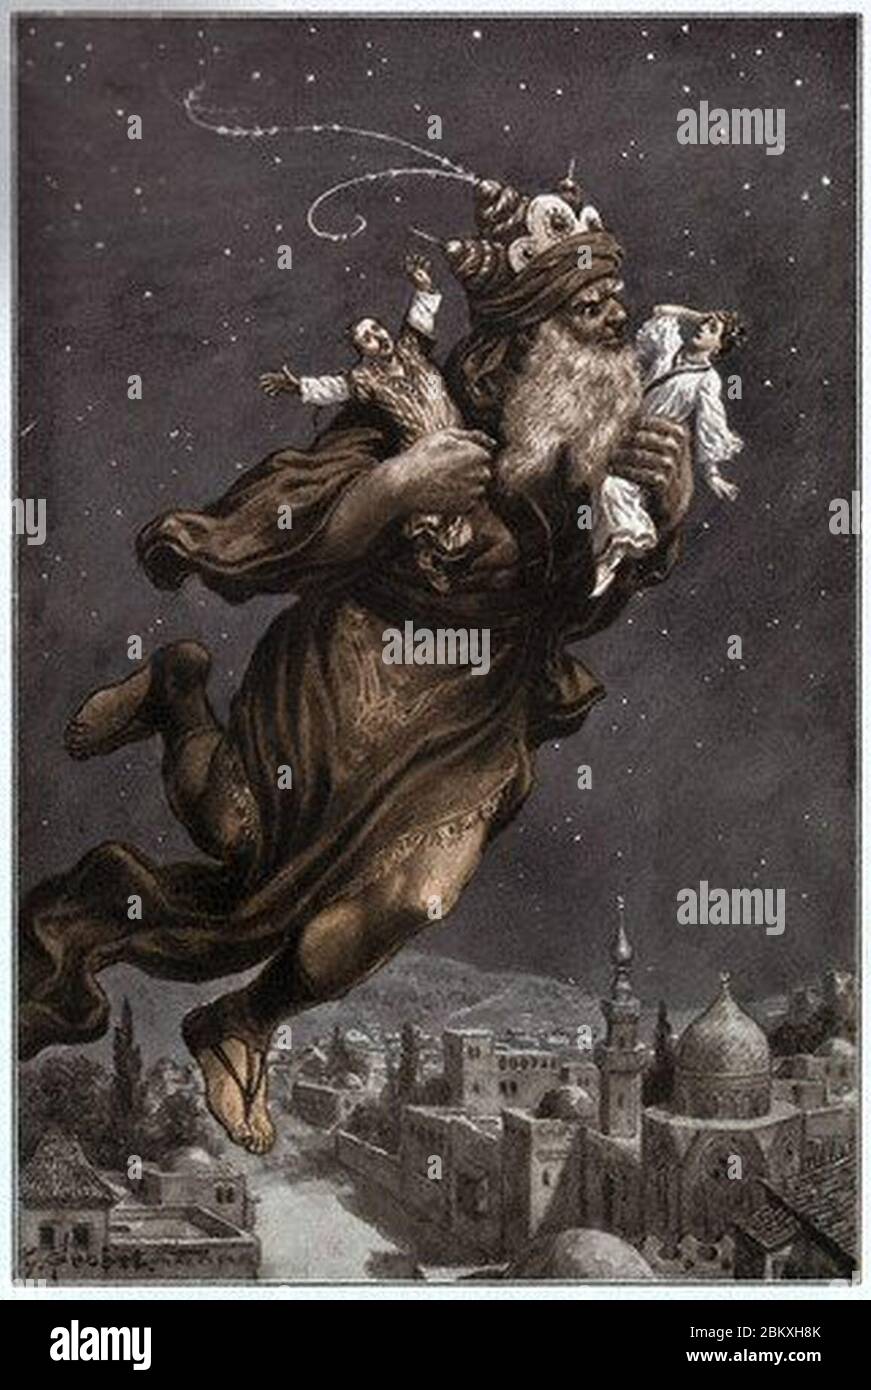 Illustration of Aladdin Flying Away with Two People from the Arabian Nights. Stock Photo